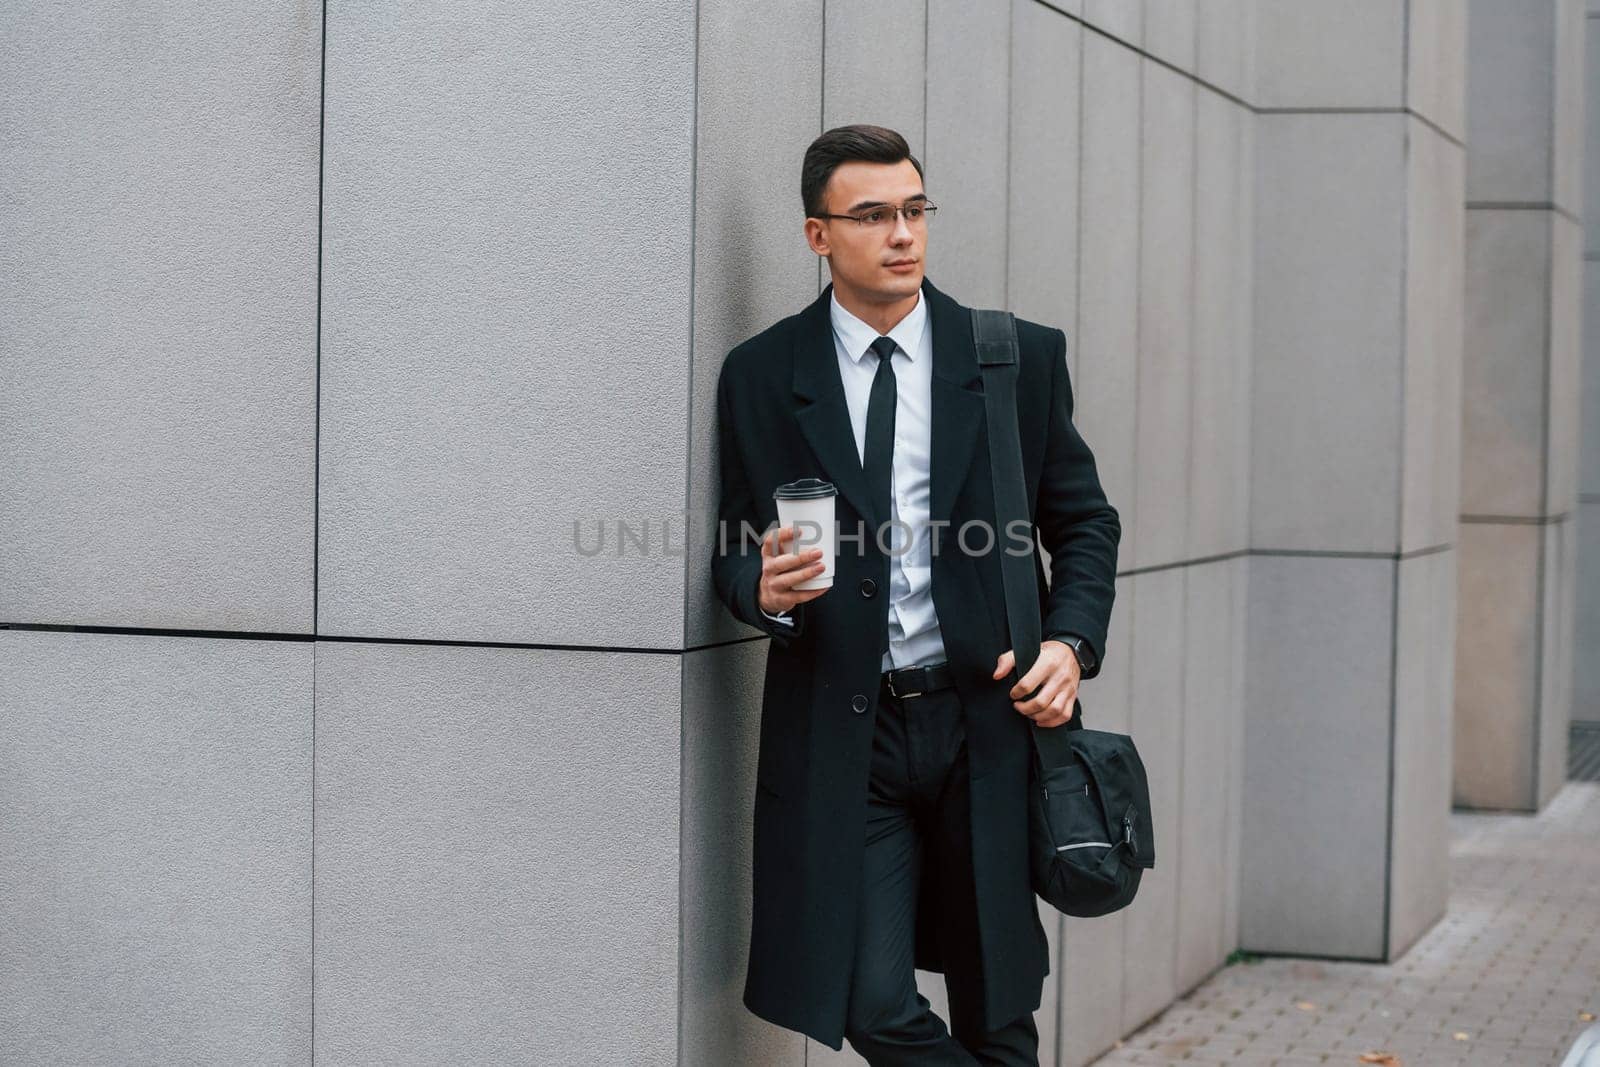 With cup of drink. Businessman in black suit and tie is outdoors in the city.